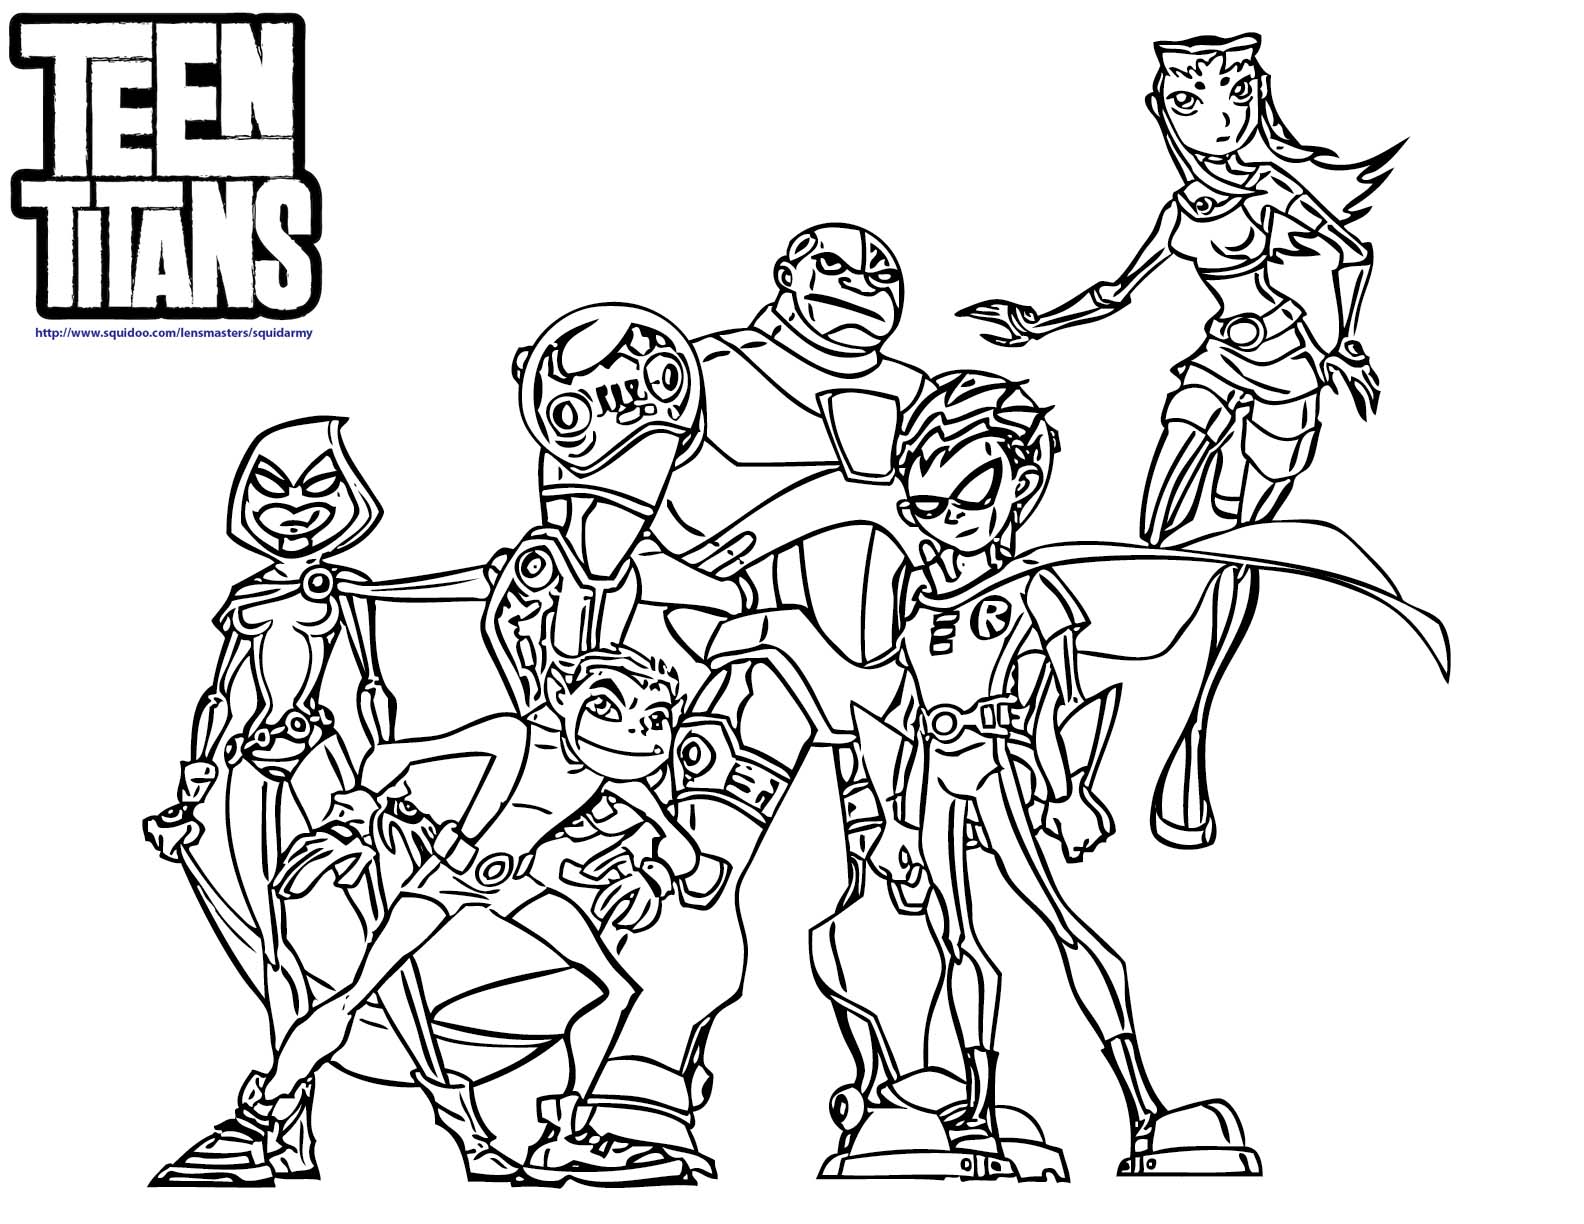 Anime Teen Titans Coloring Pages - Coloring Pages For All Ages